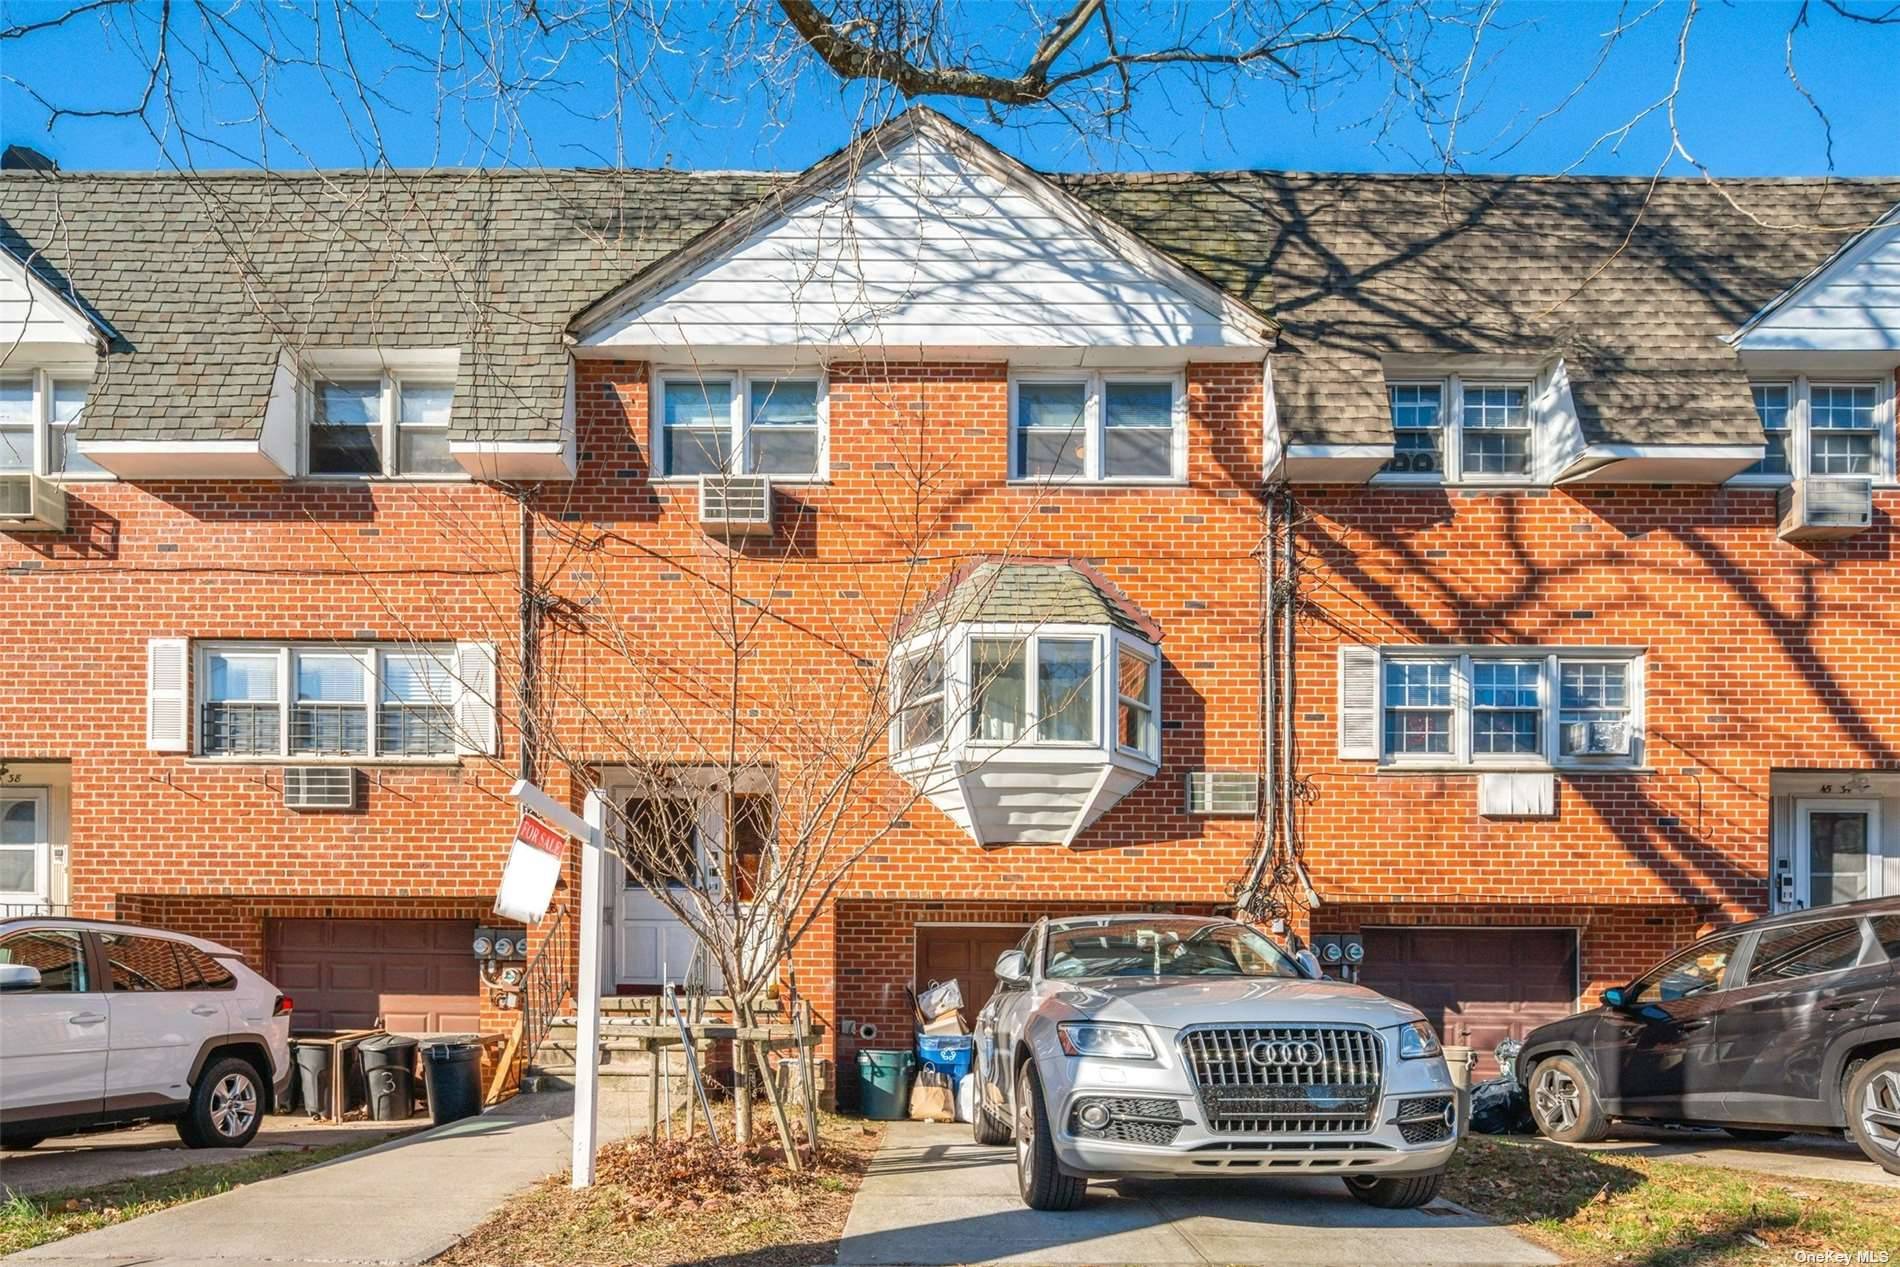 This is an amazing opportunity to own this Rare 4 family Brick House in center of Bayside.